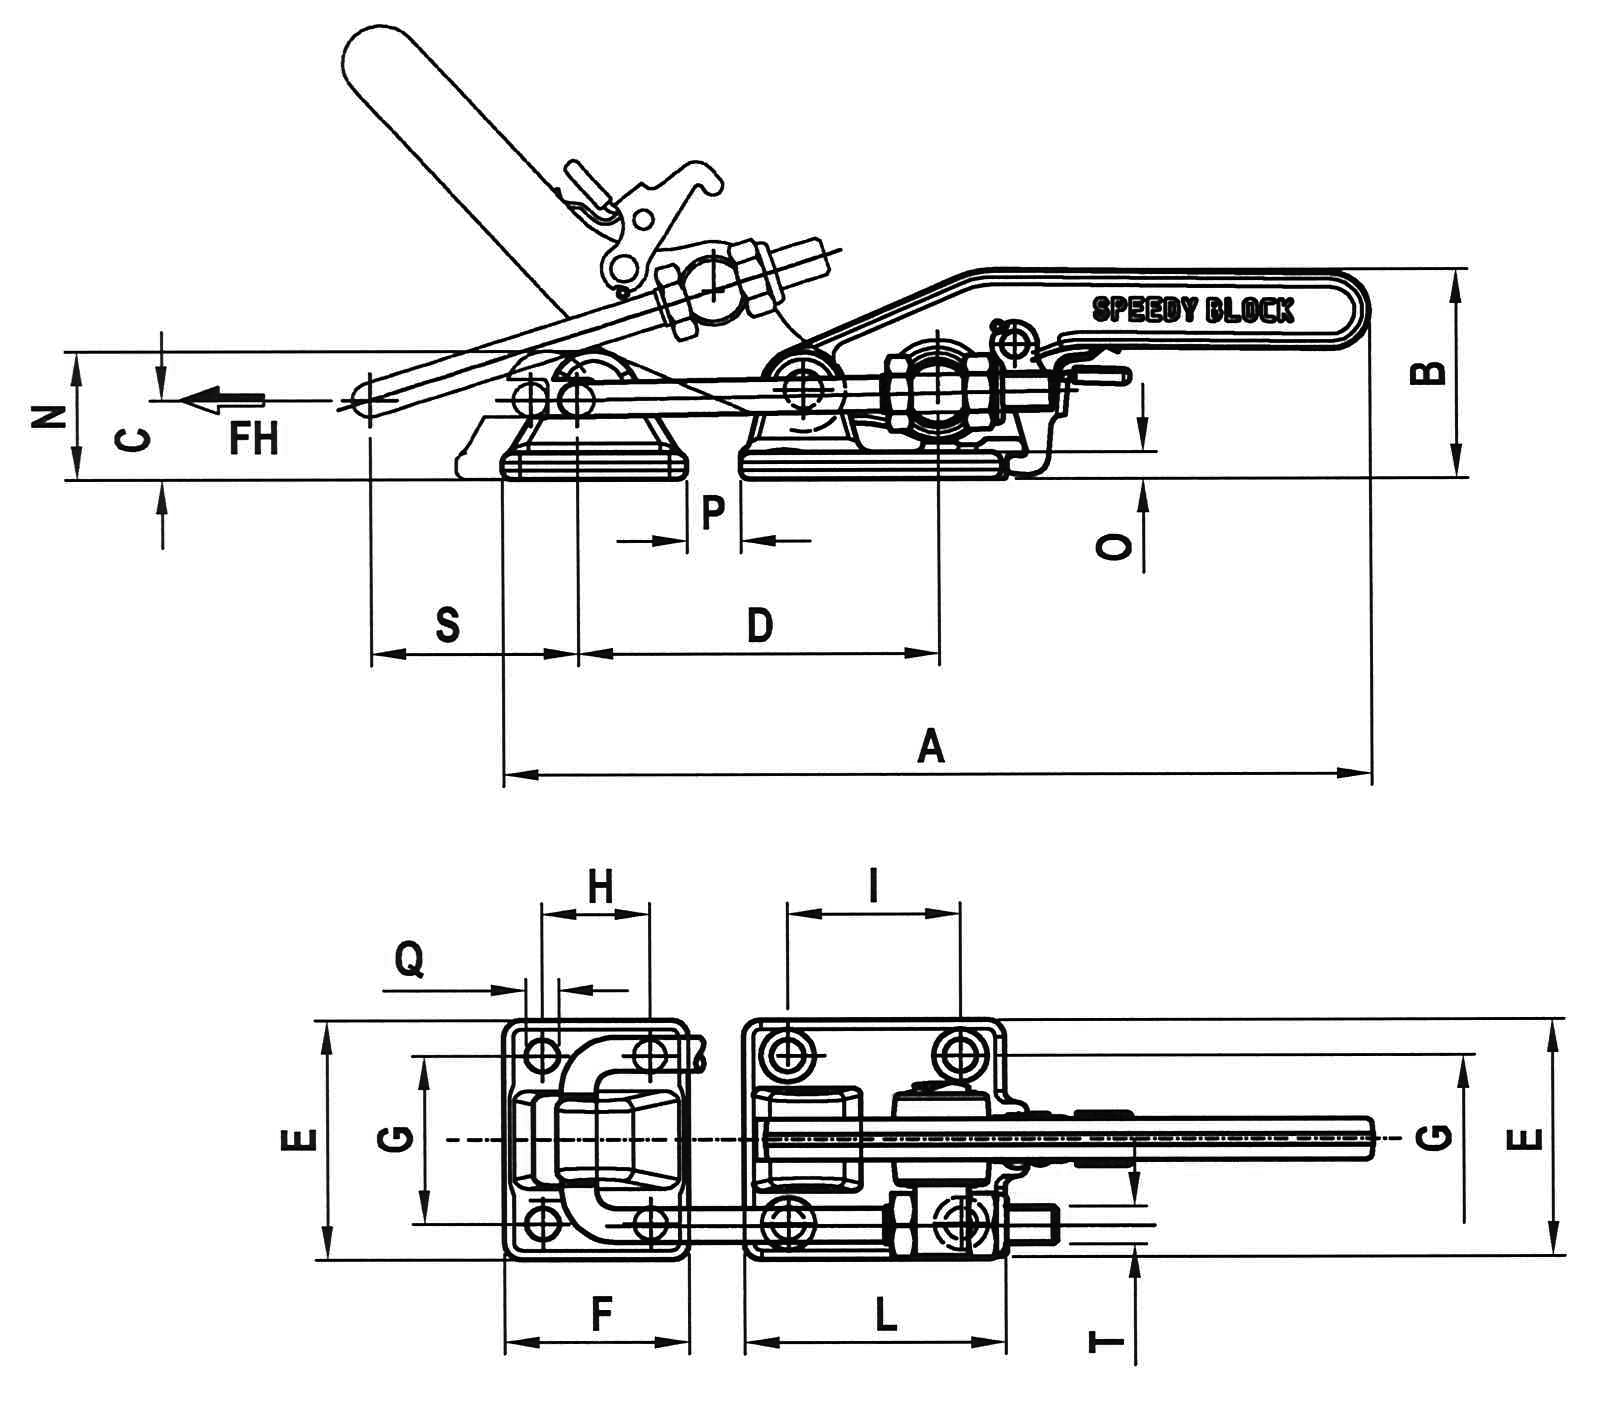 Click to enlarge image 1Latch_T6 heavy with safety lock tech.jpg